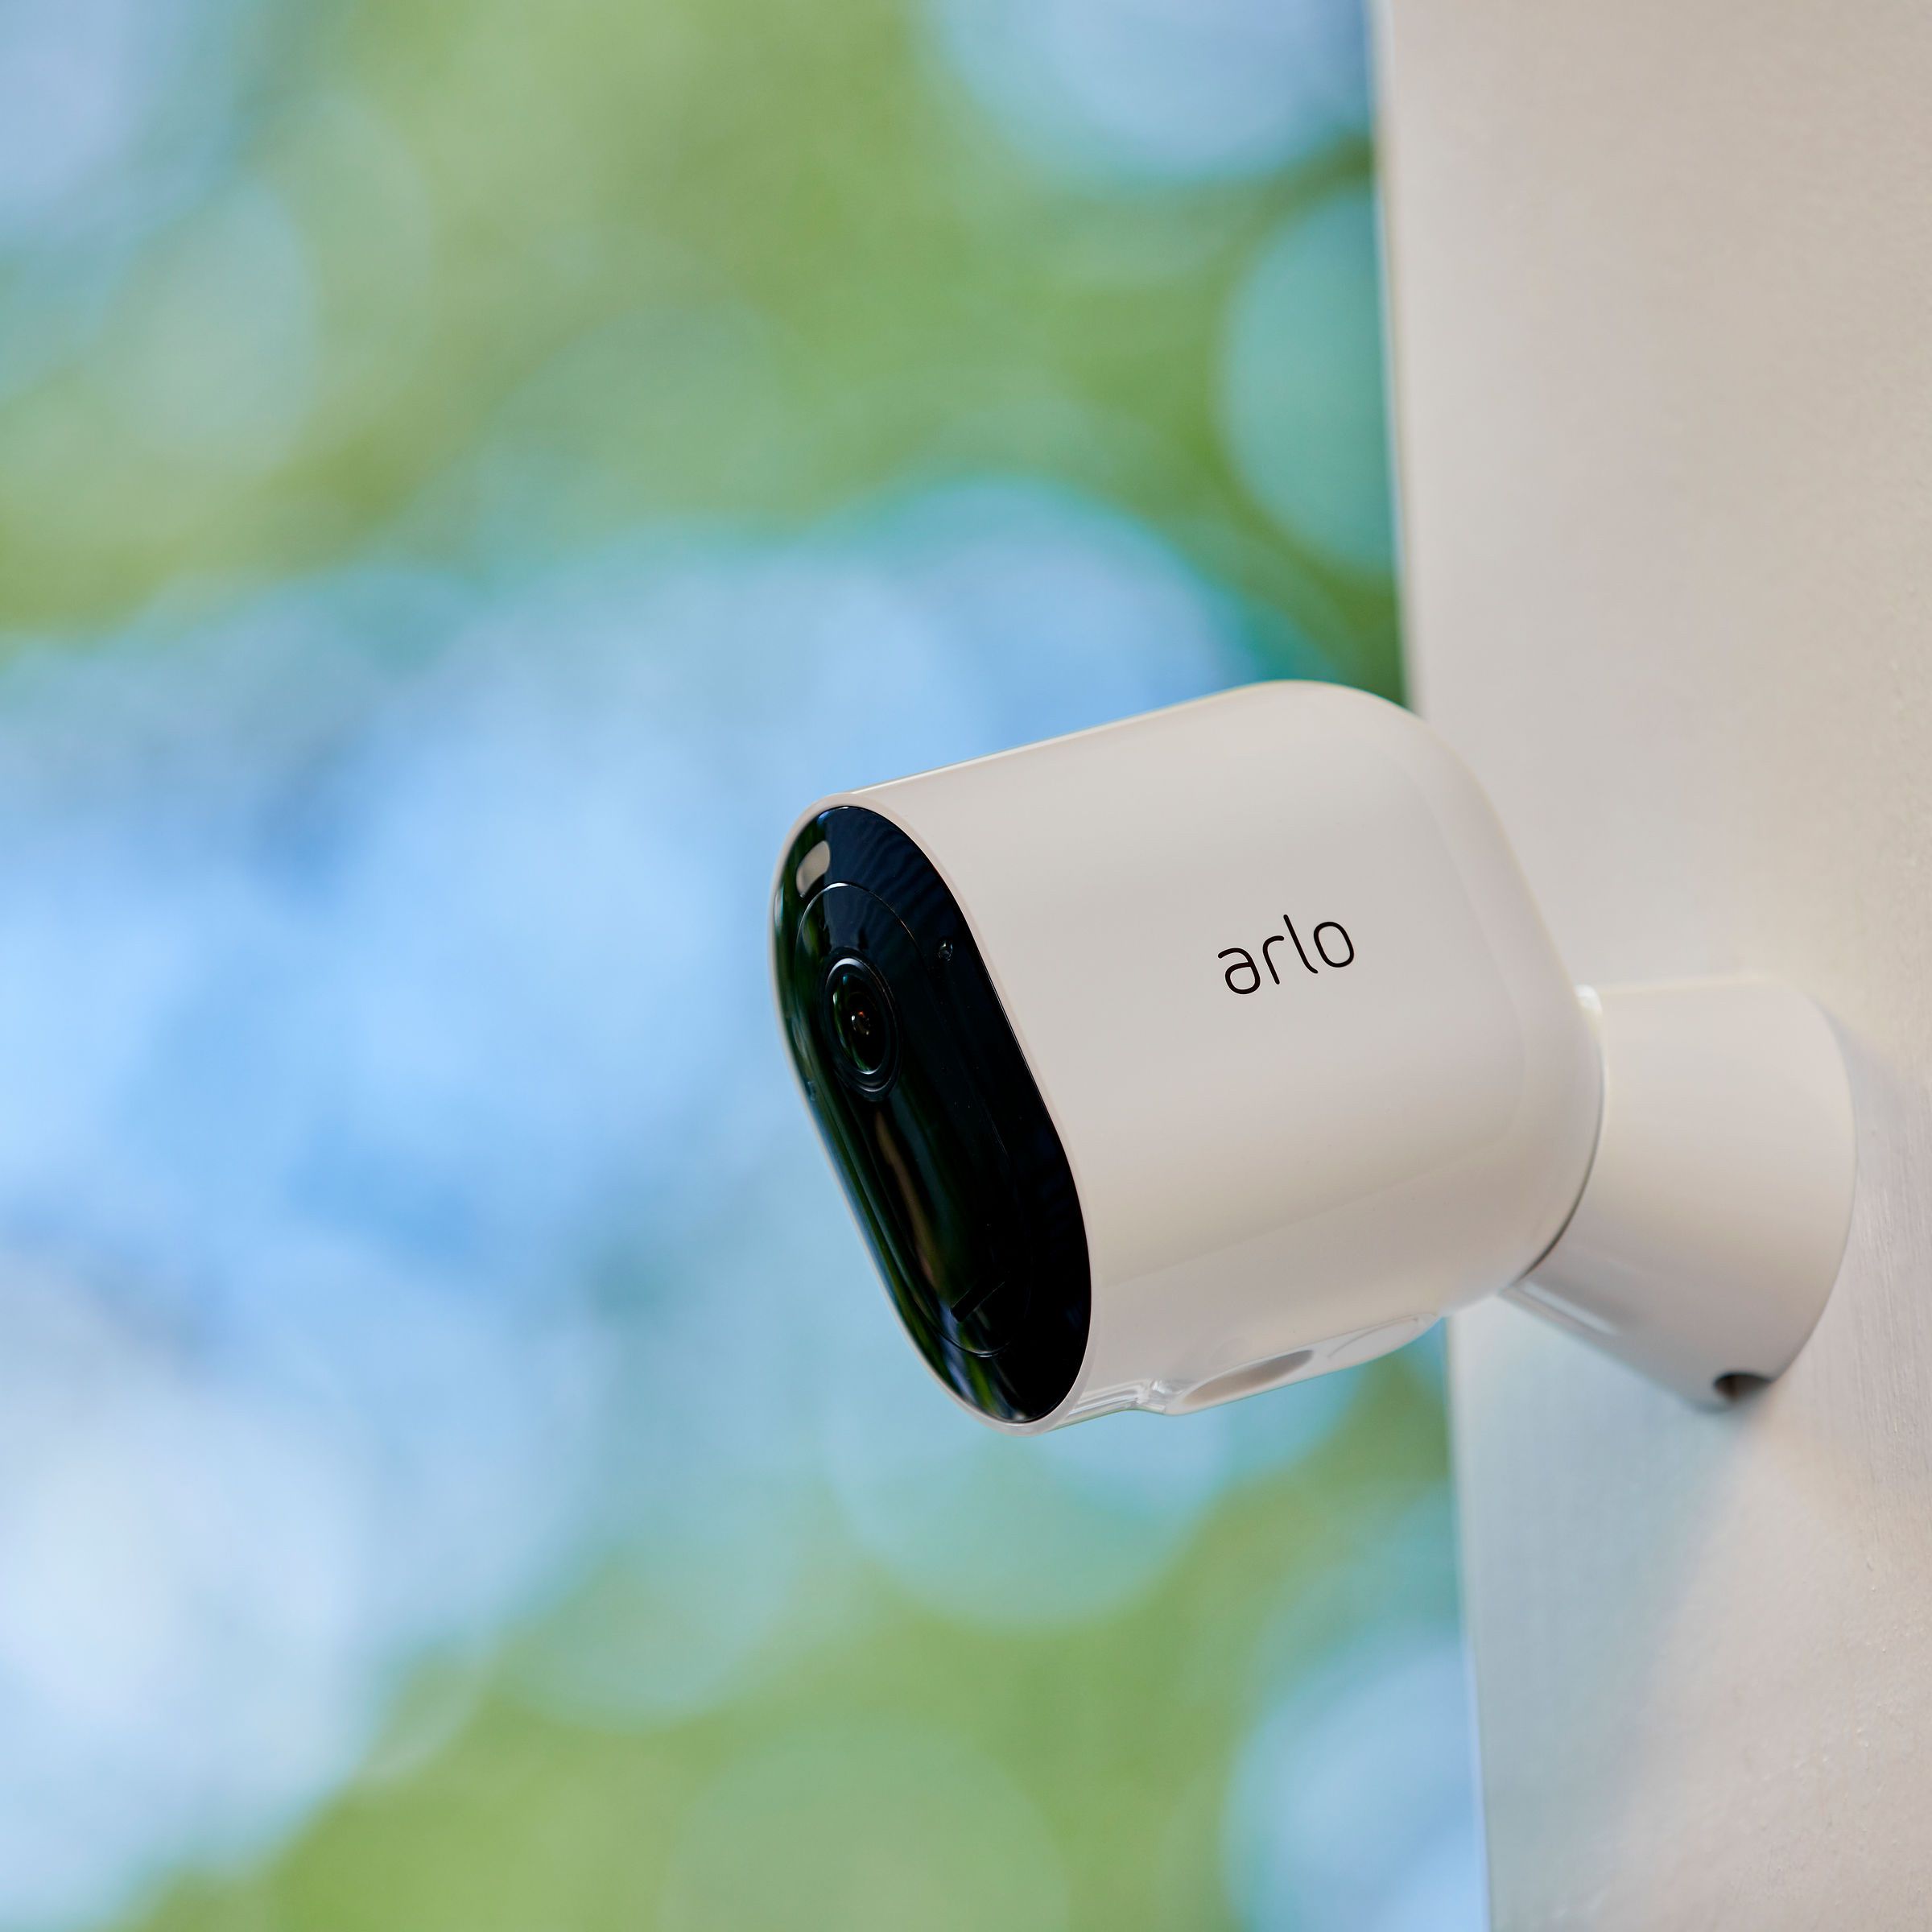 The Arlo Pro 4 mounted outdoors.